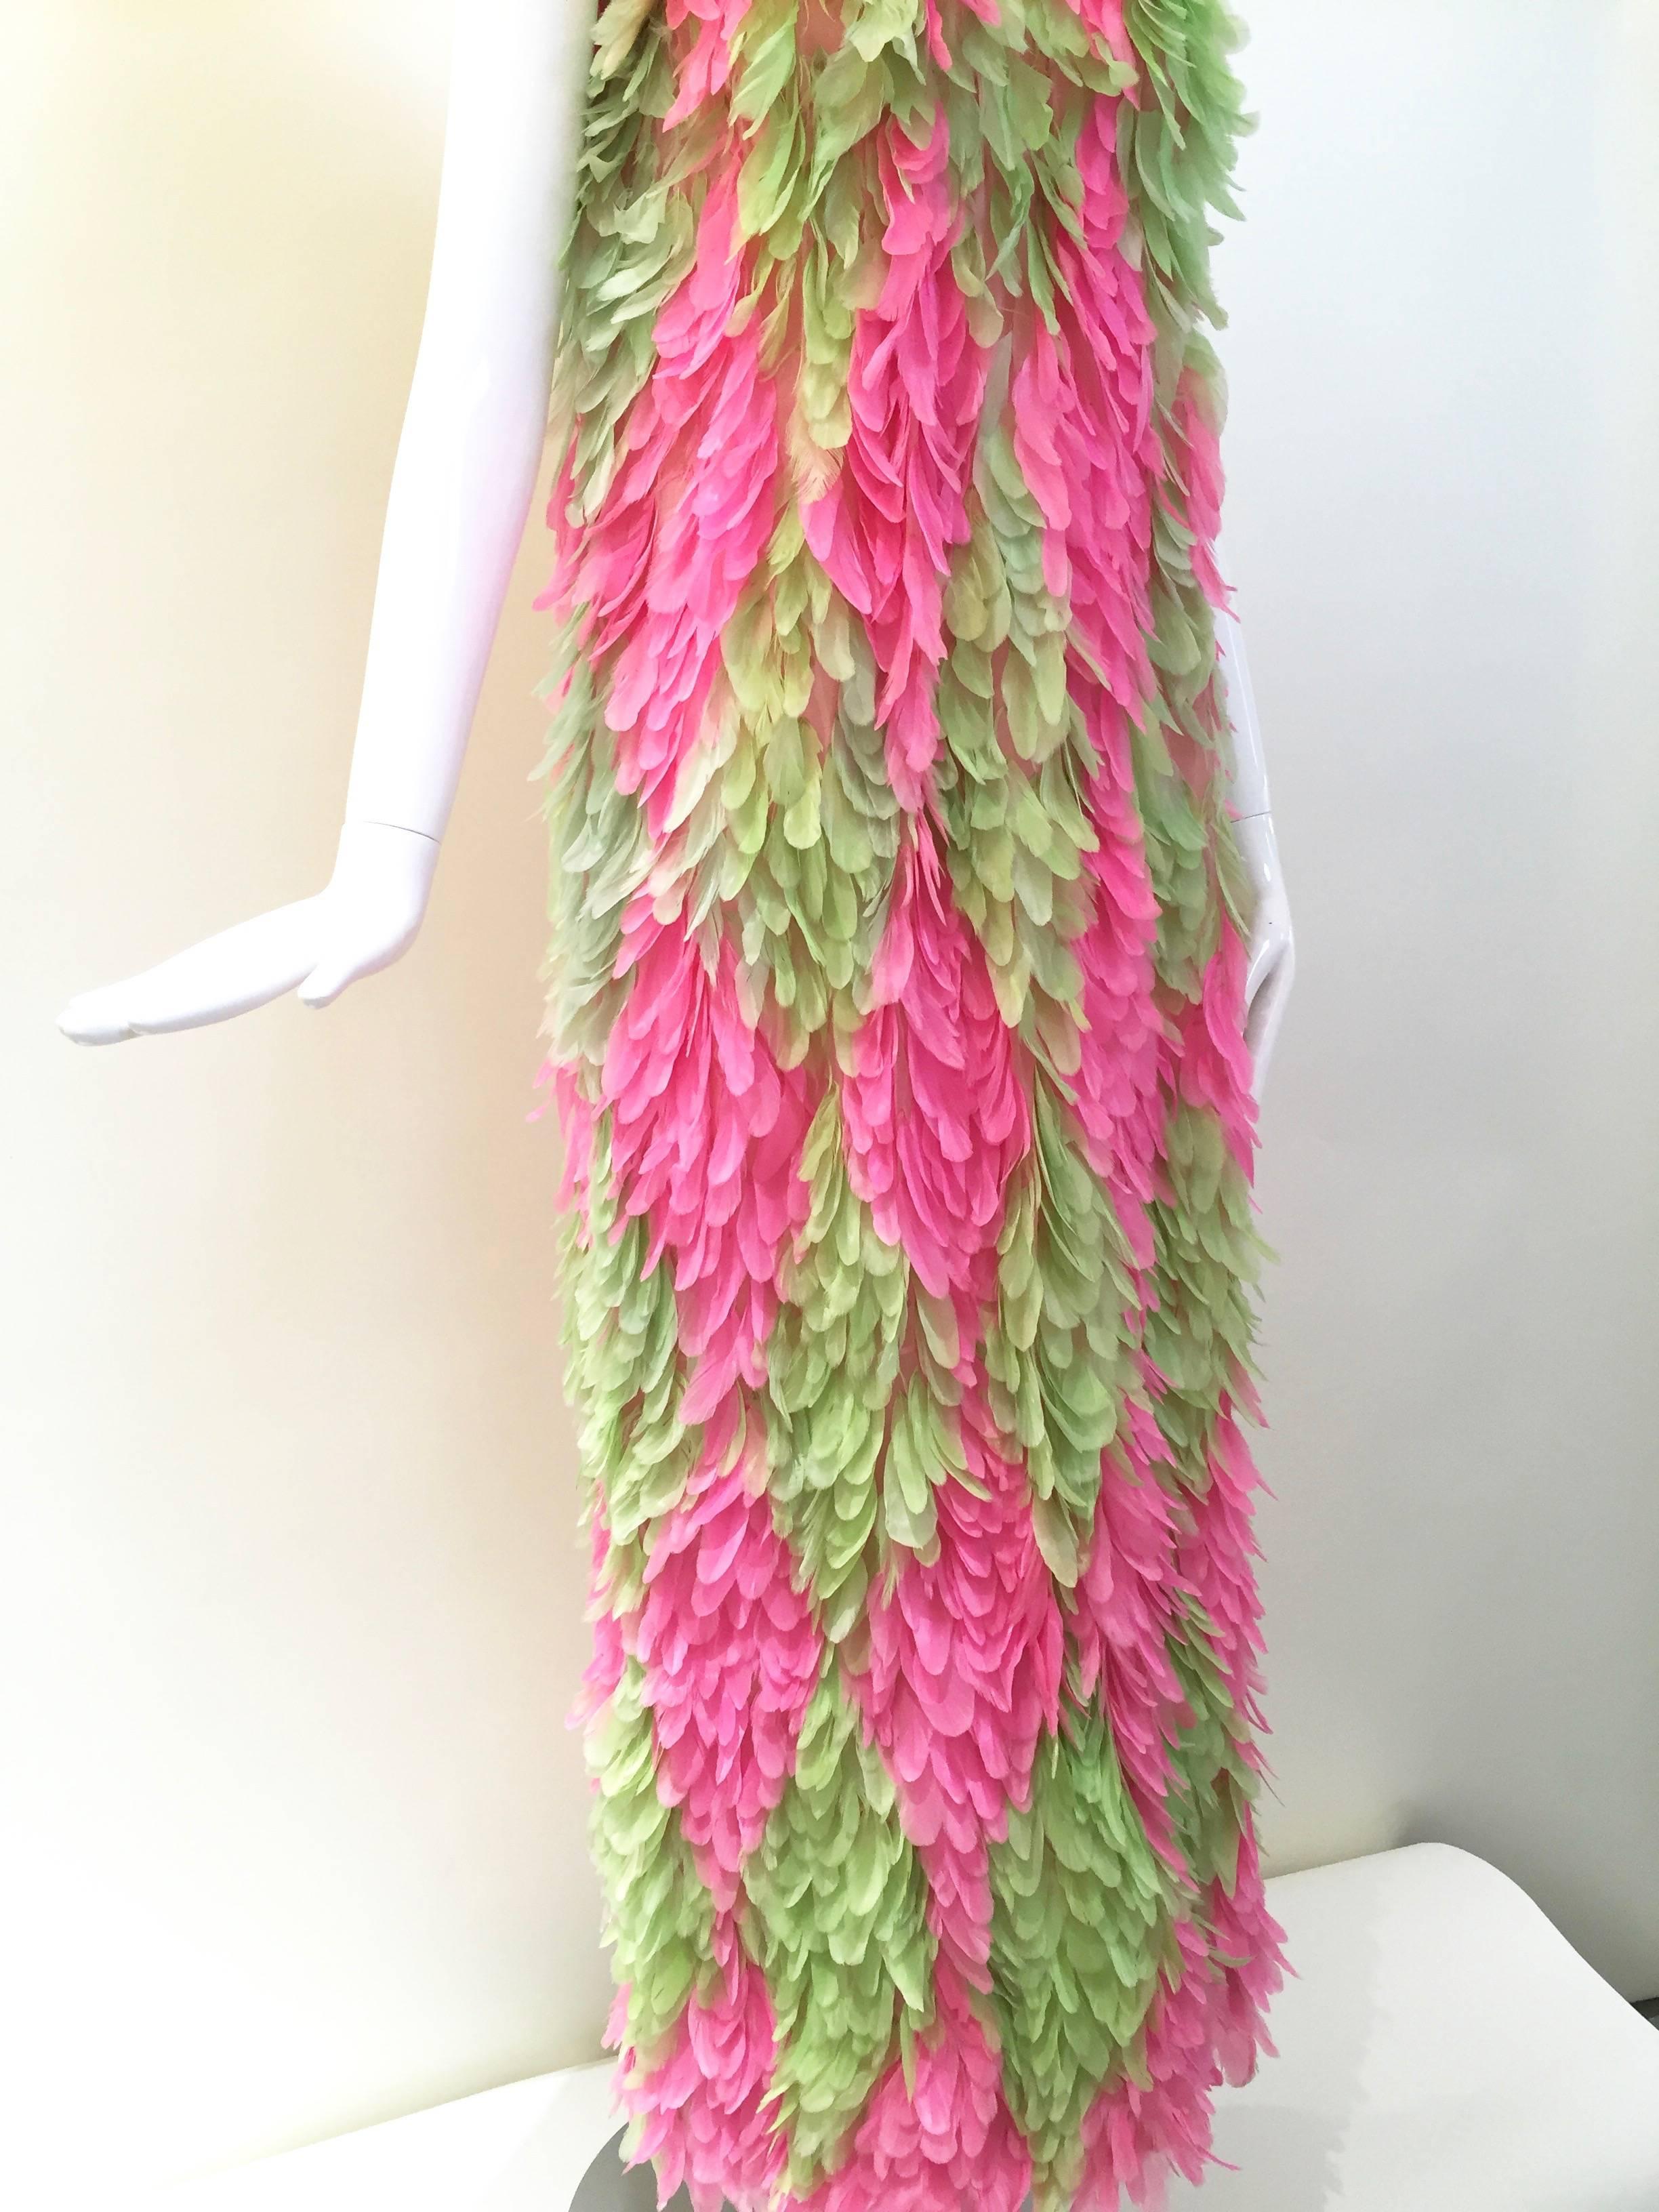 60s feather dress